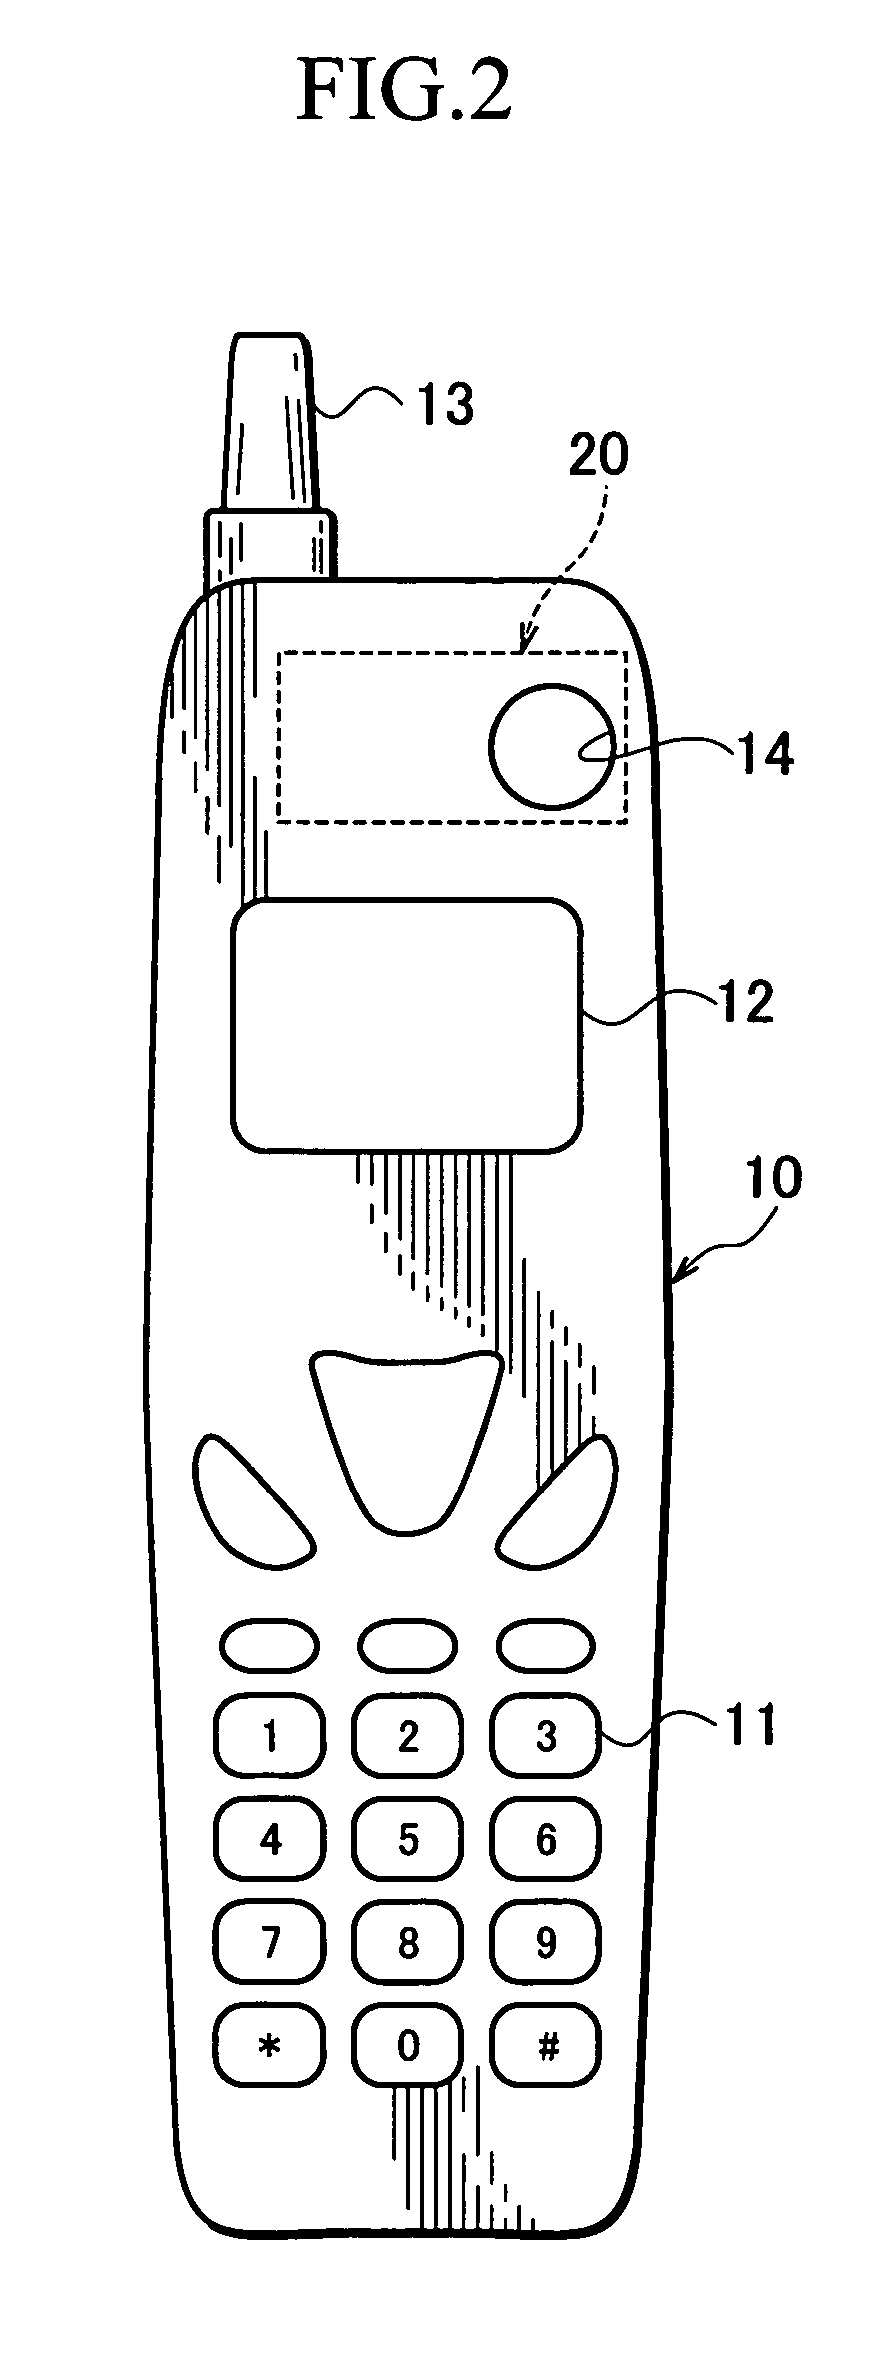 Blade driving device for use in cameras